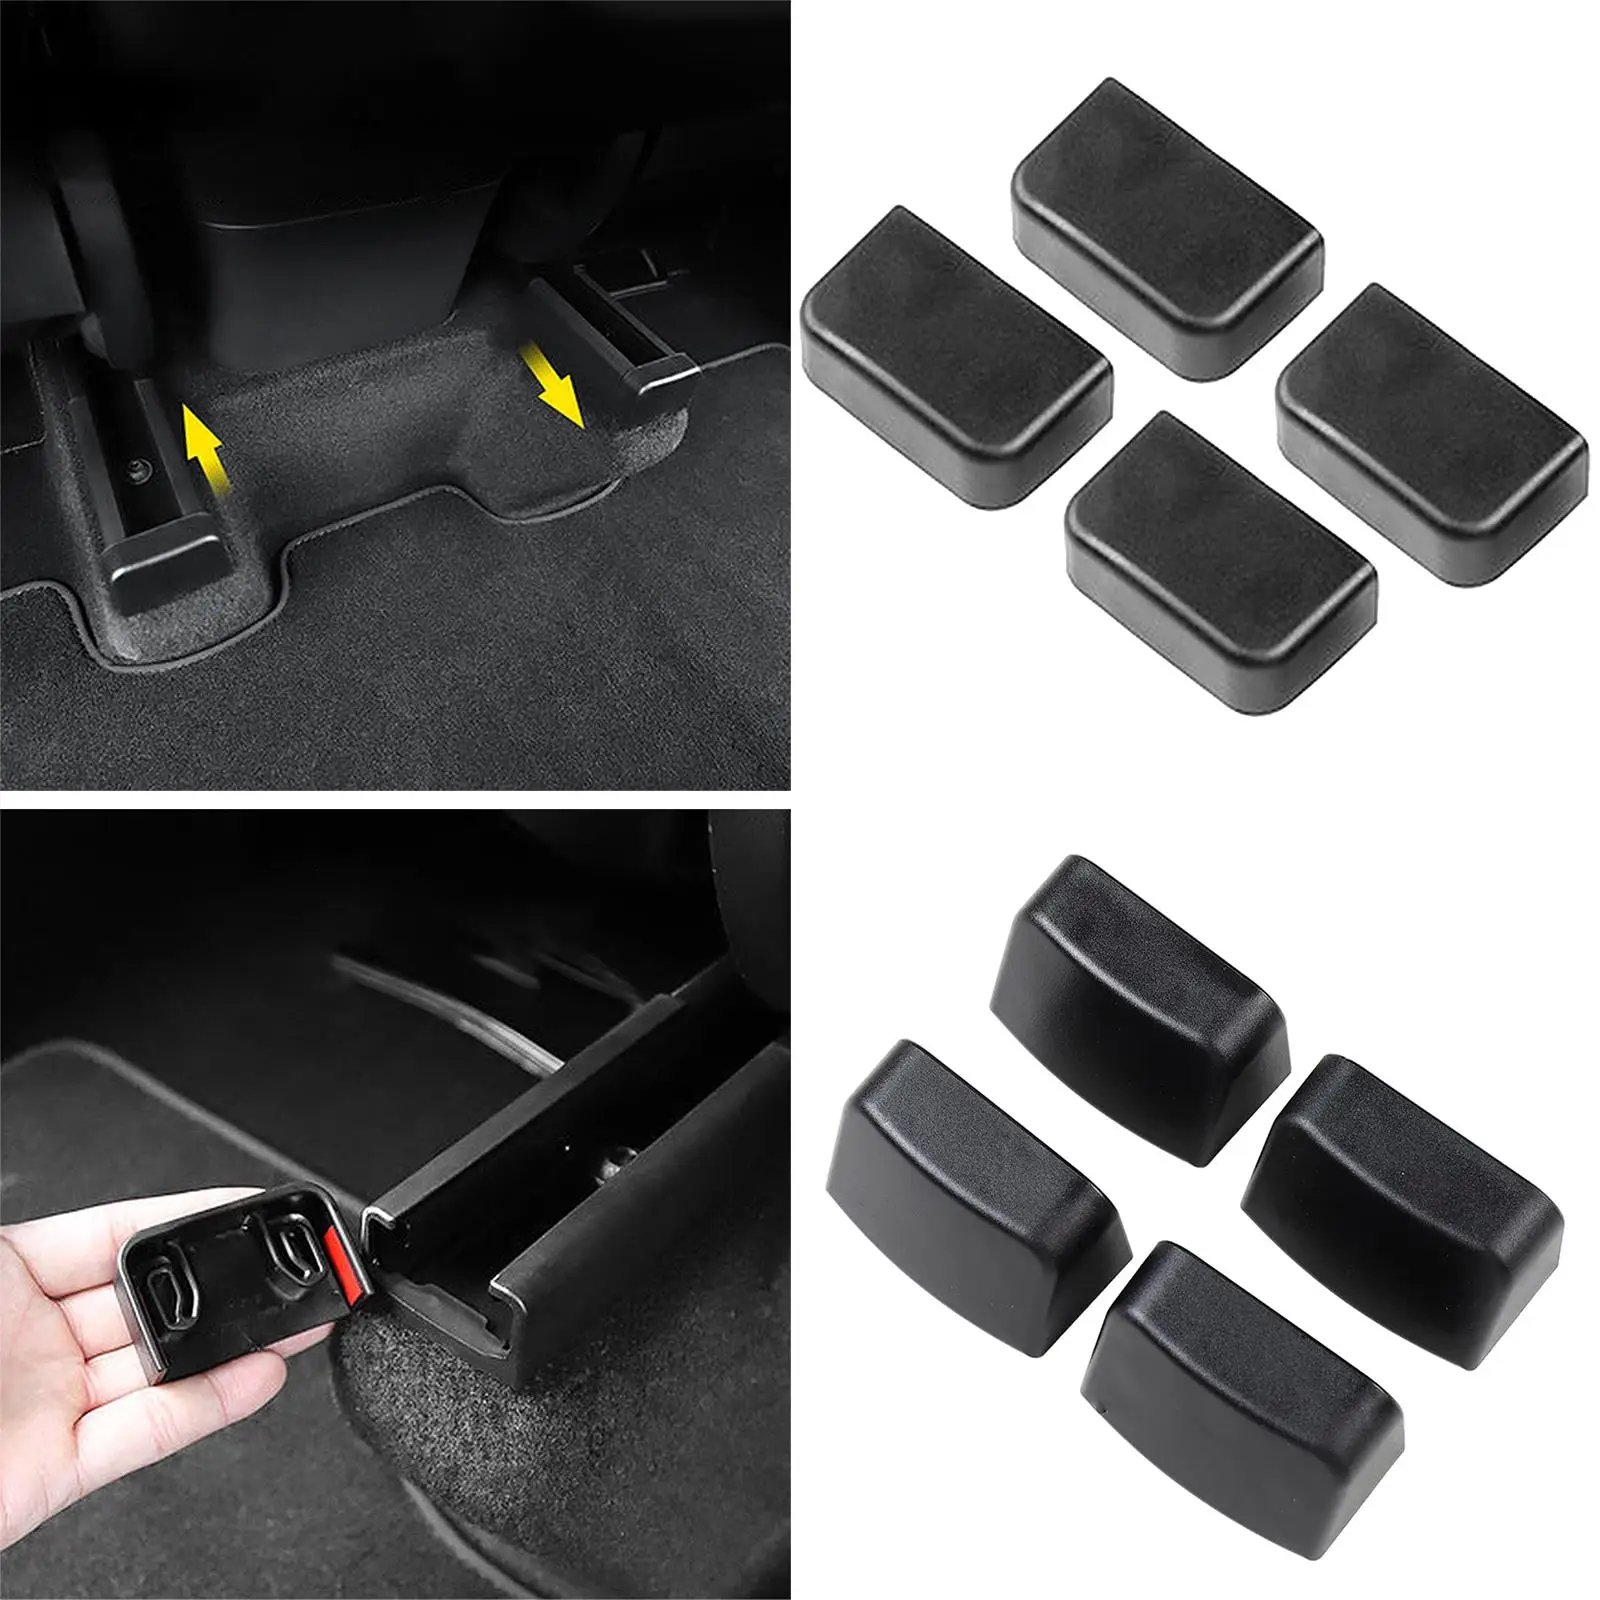 4x Slide Rail Plugs ABS Auto Functional Accs Car Interior Rear Seat for Tesla Model 3/Y